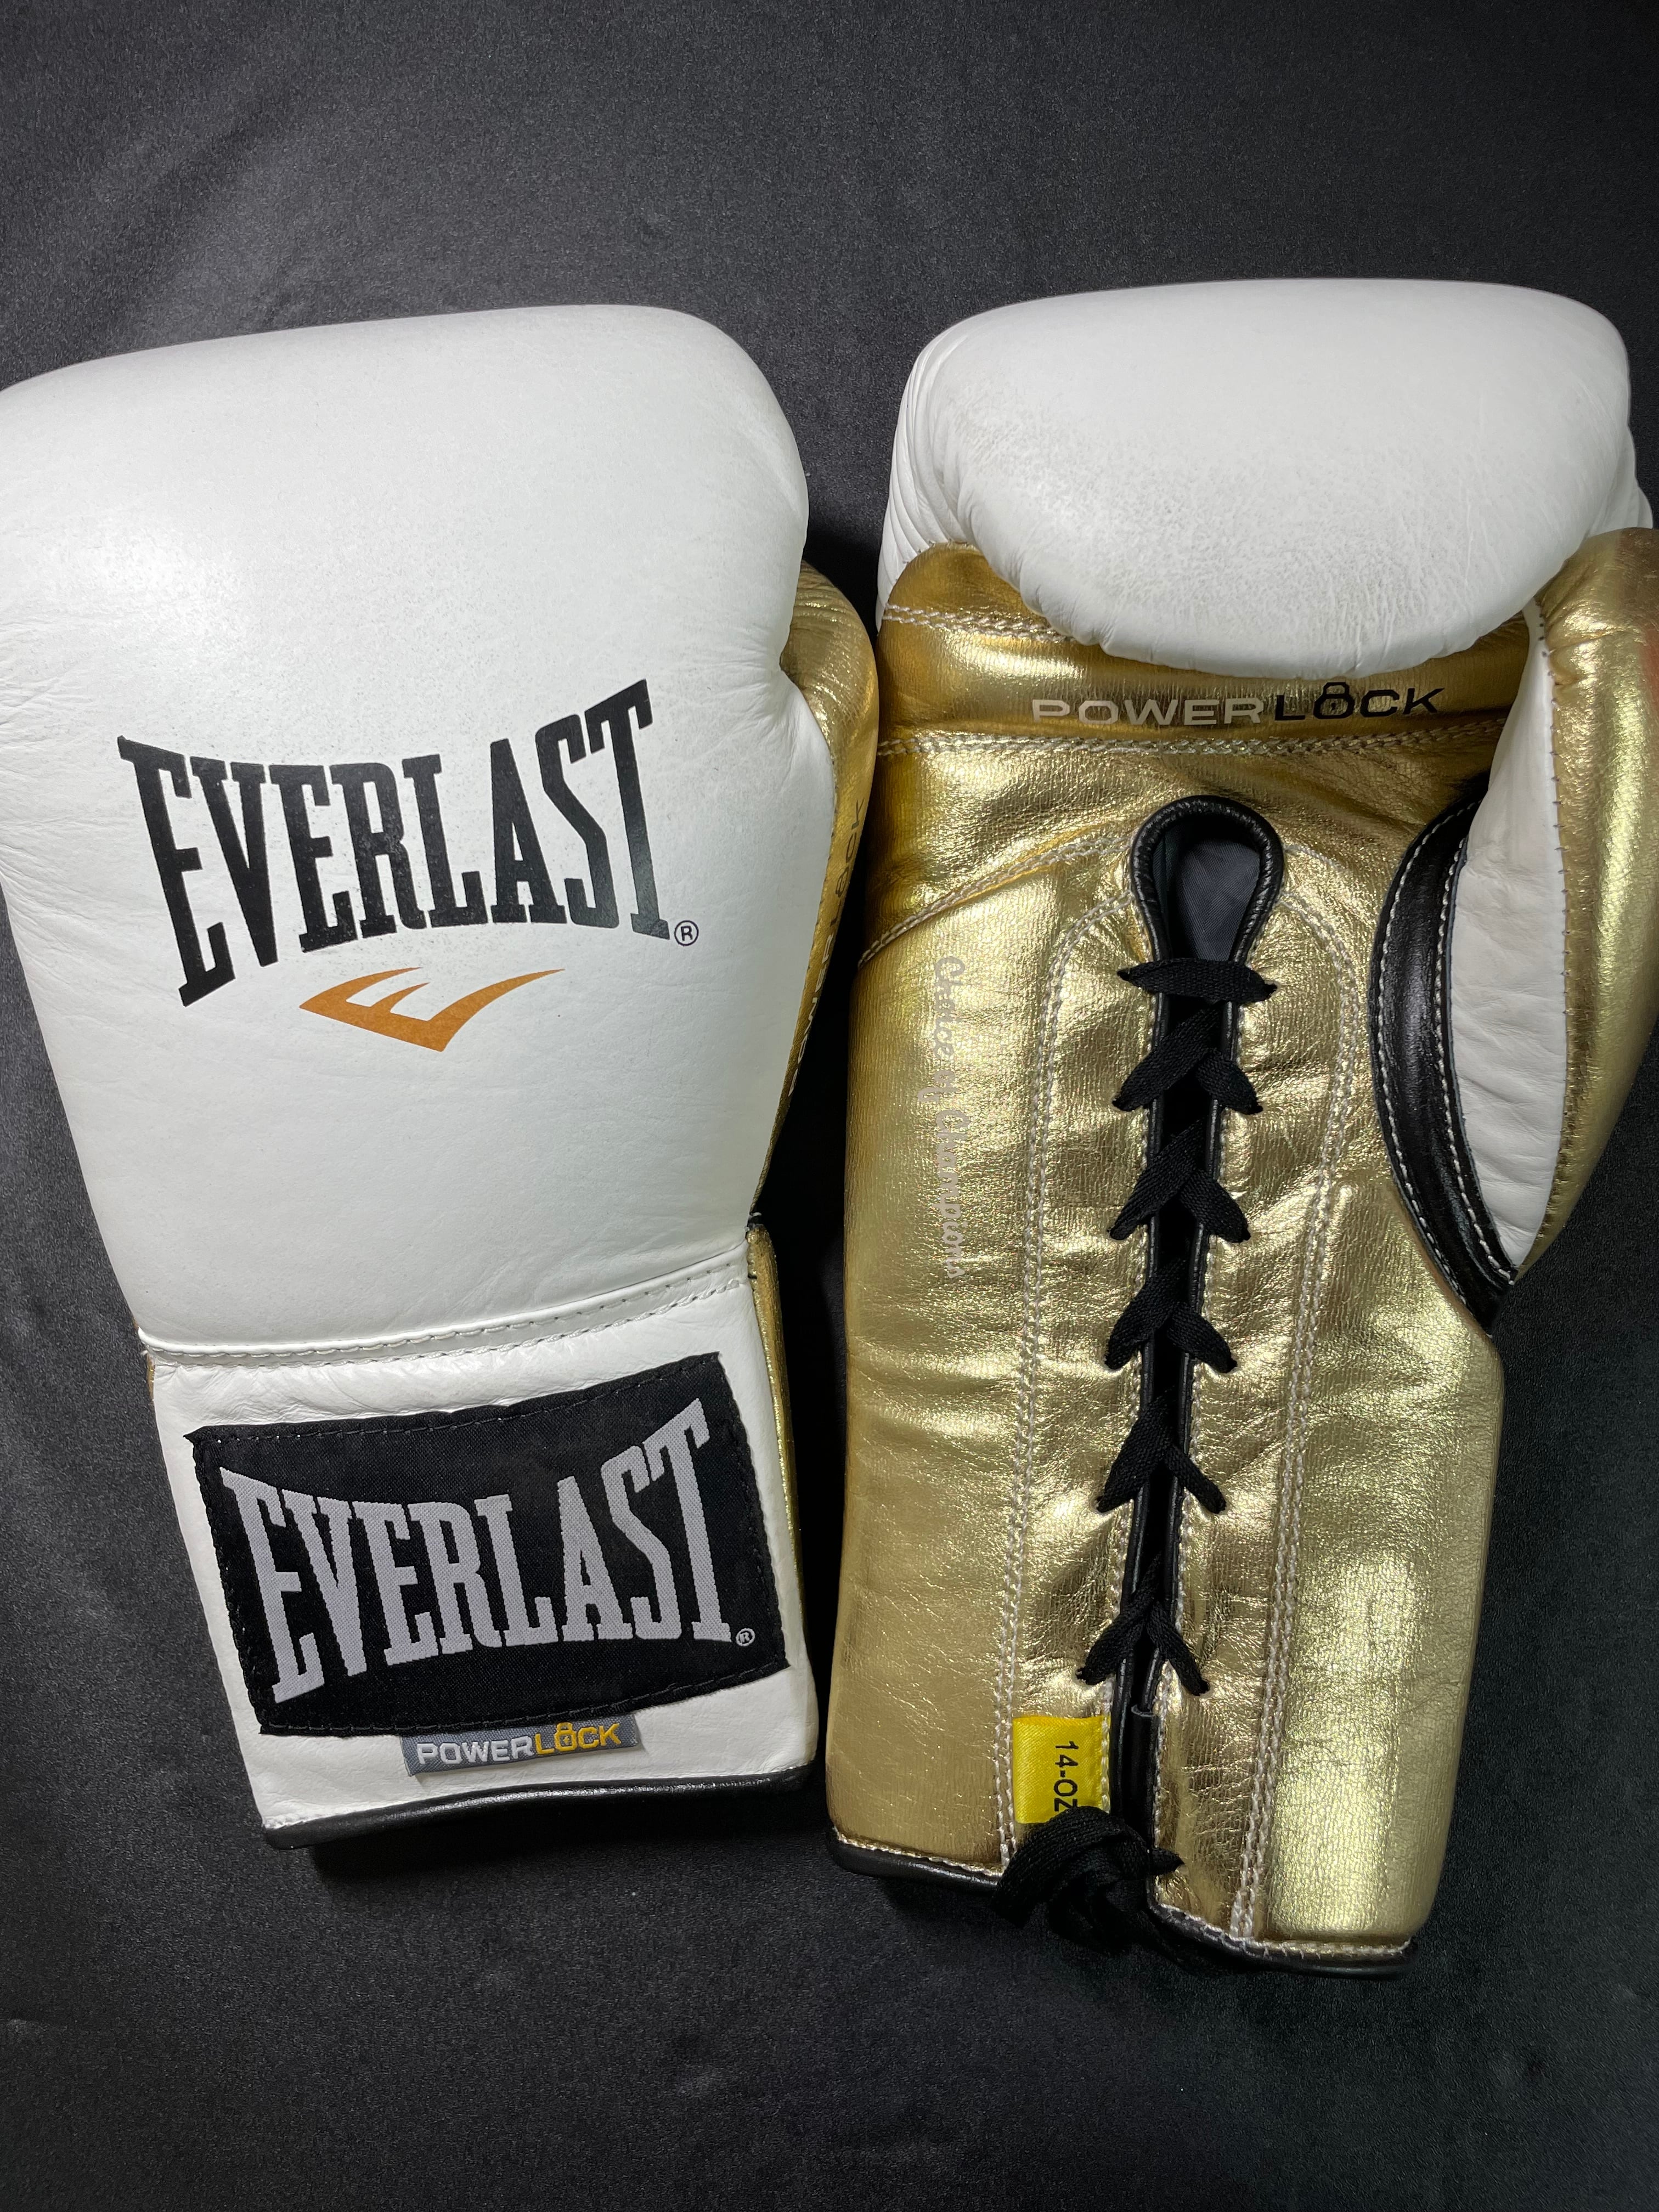 EverlastエバーラストパワーロックレーストレーニンググローブPowerlock Laced Training Gloves |  ボクシング格闘技専門店　OLDROOKIE powered by BASE